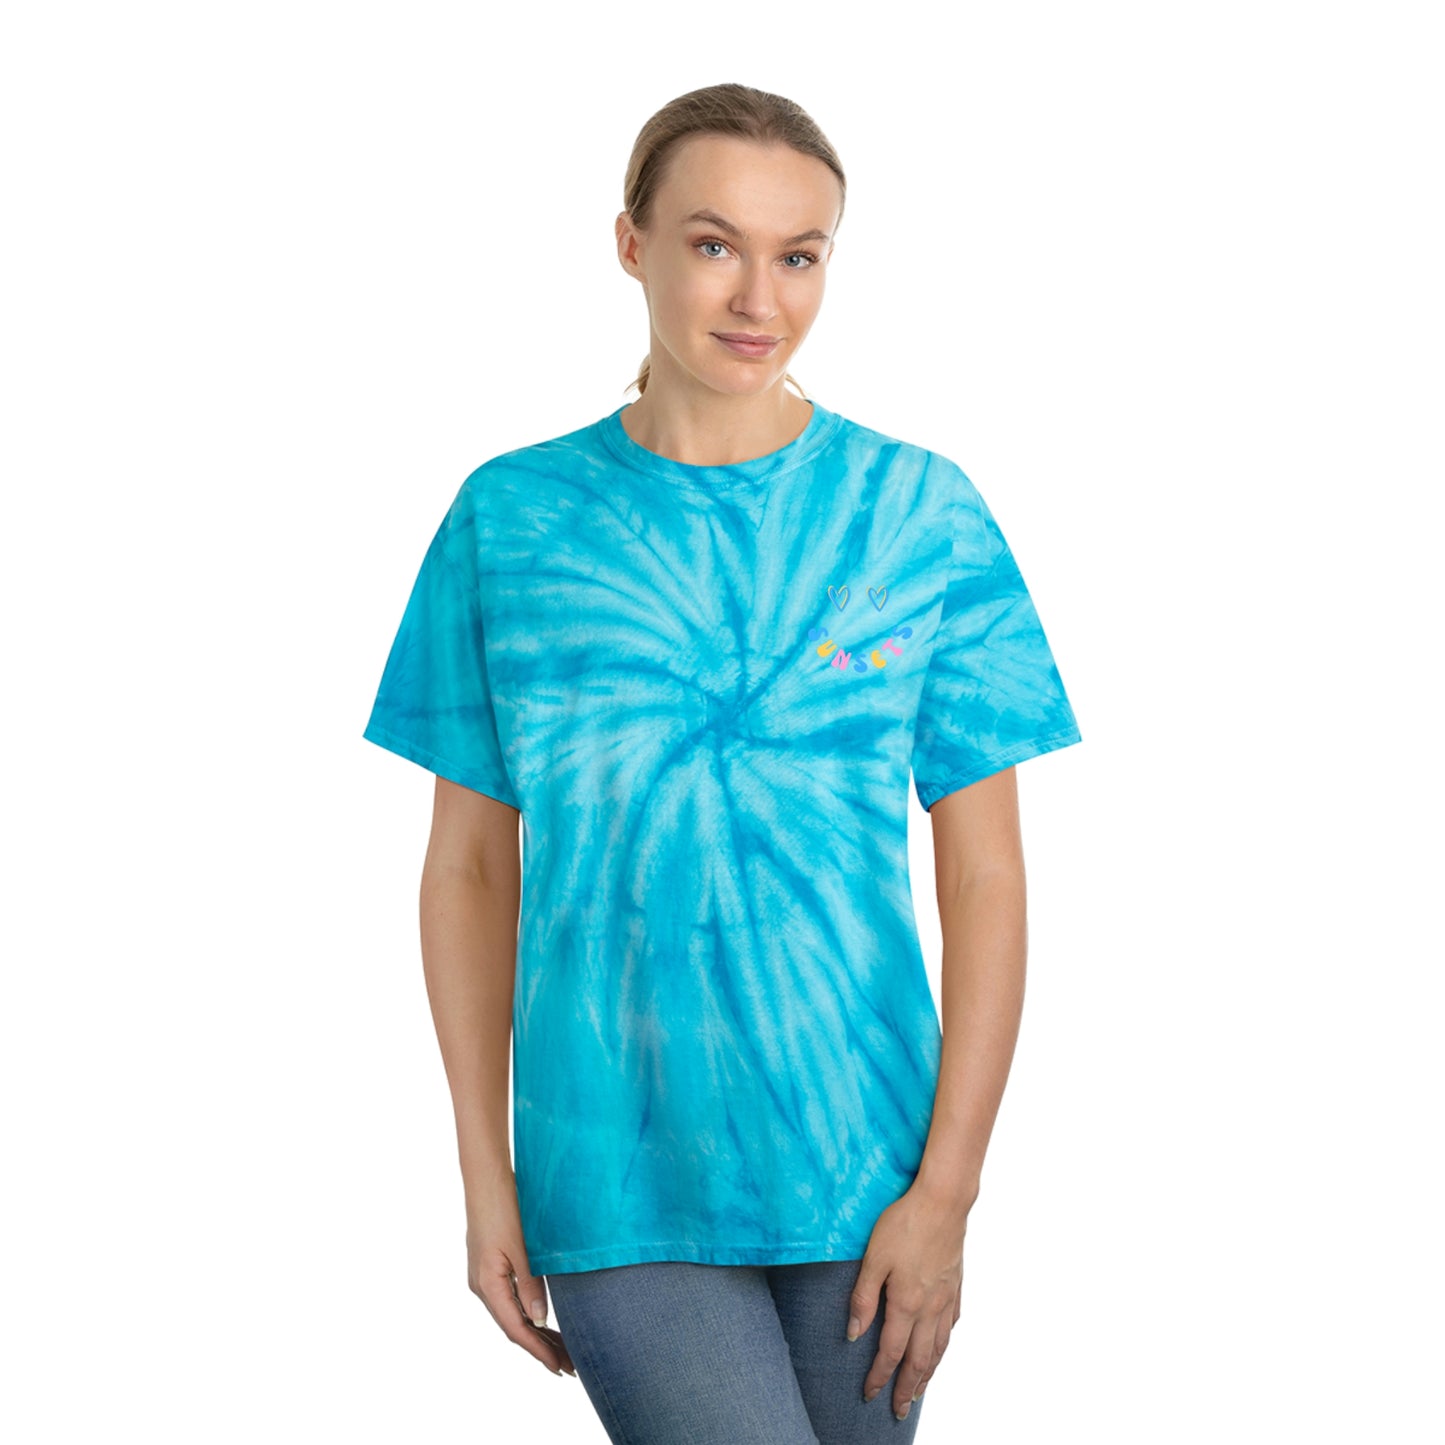 Sunsets Graphic Letter Design Unisex Tie-Dye Tee